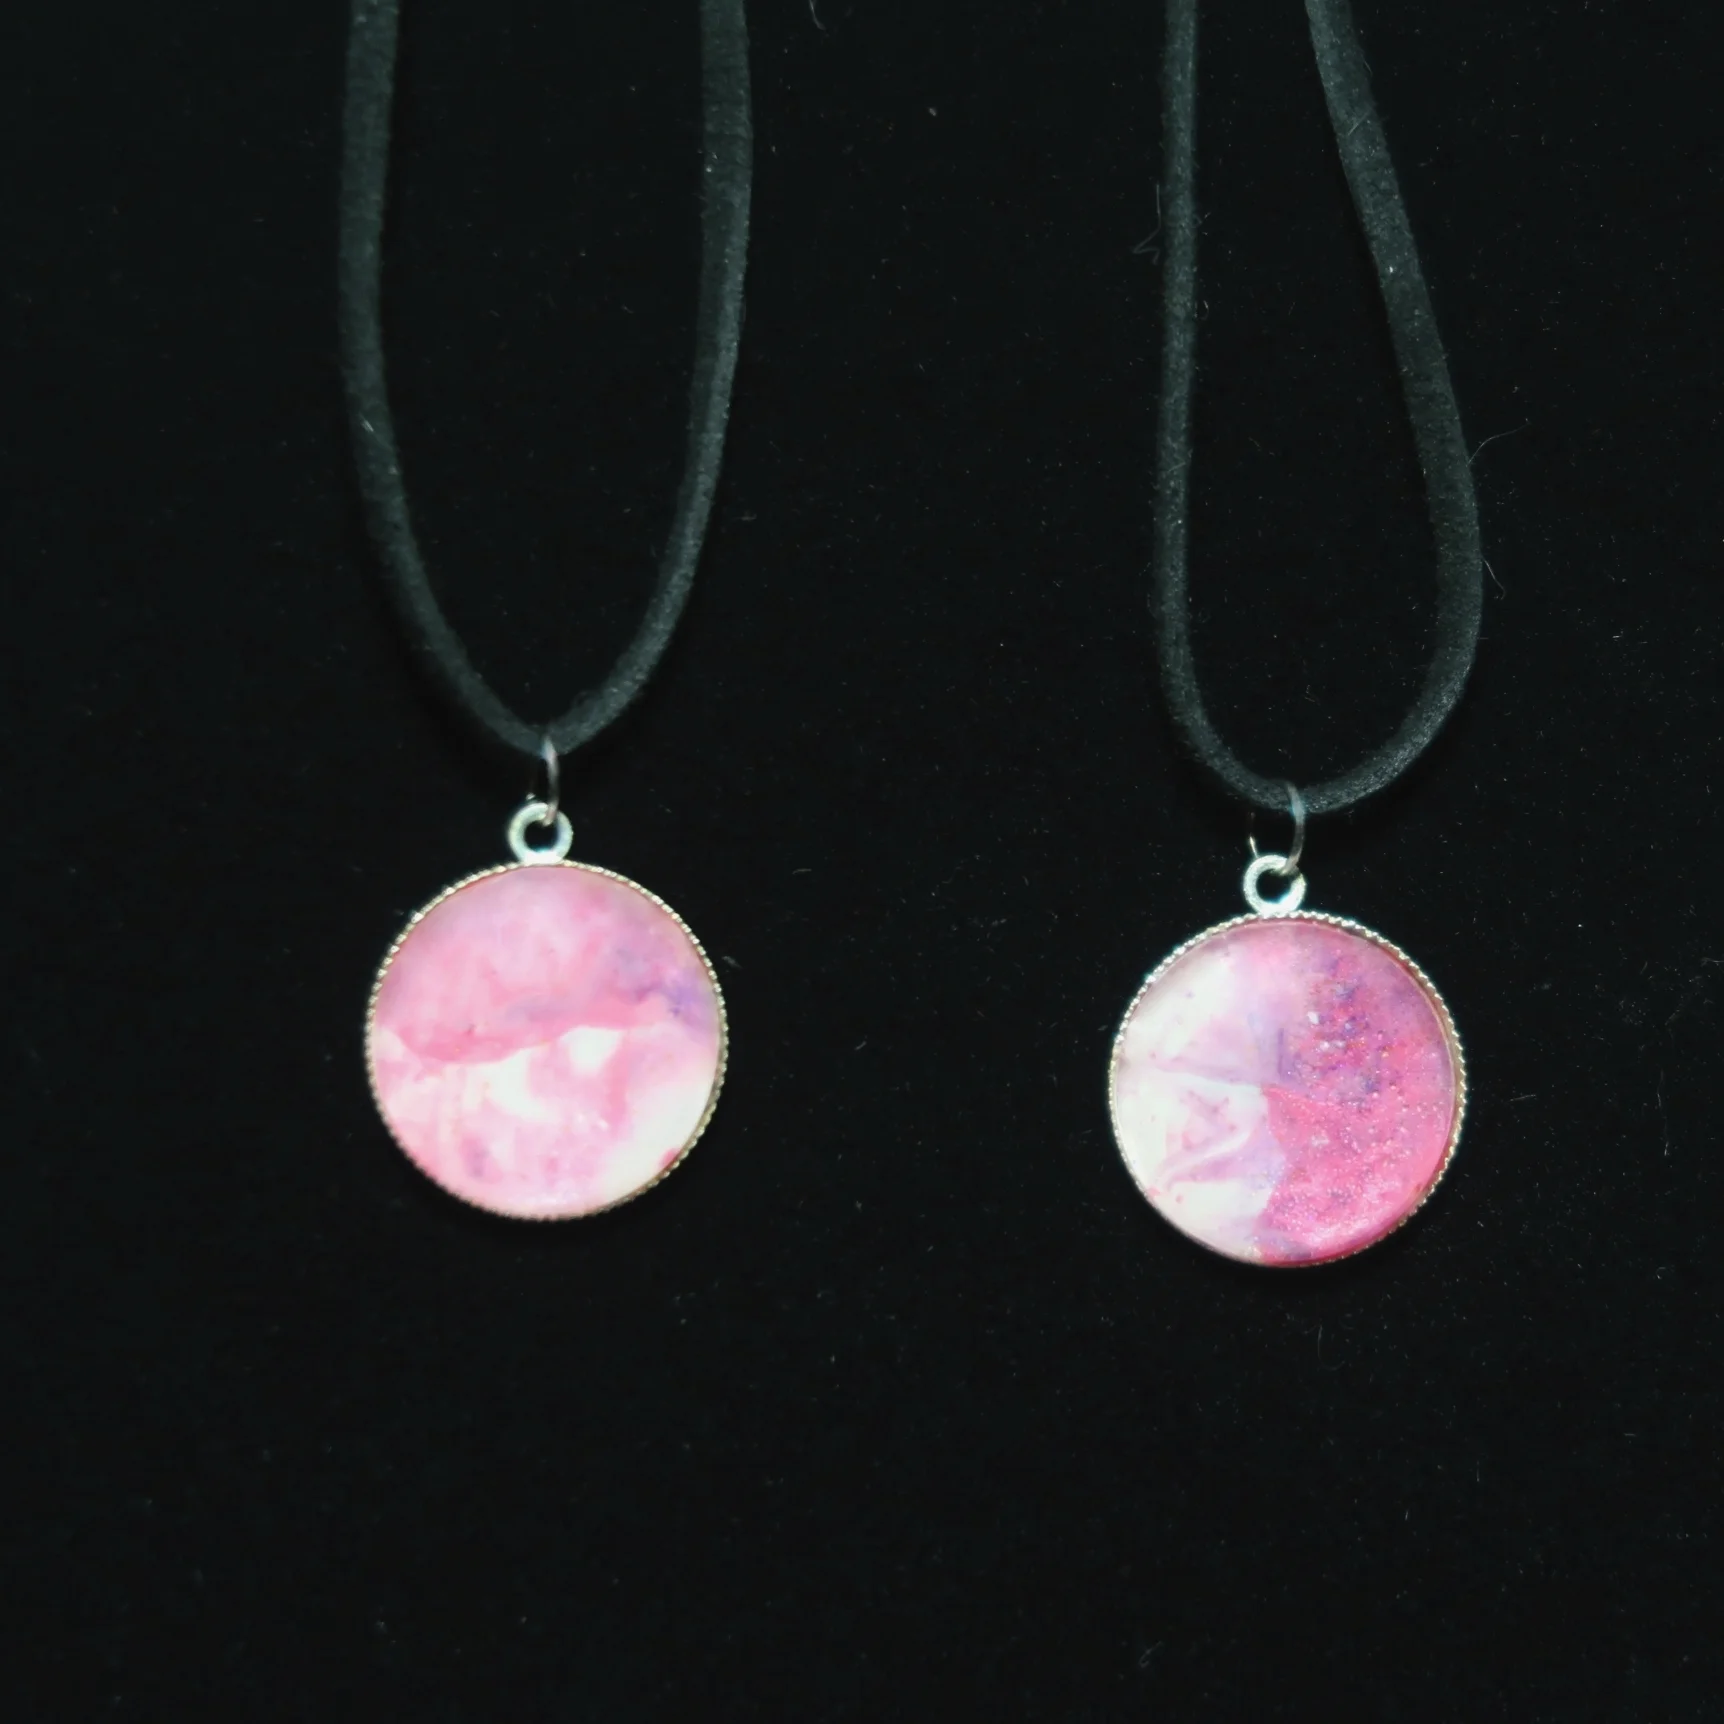 Marbled Pink and White Cabochon Pendant  - $18.00